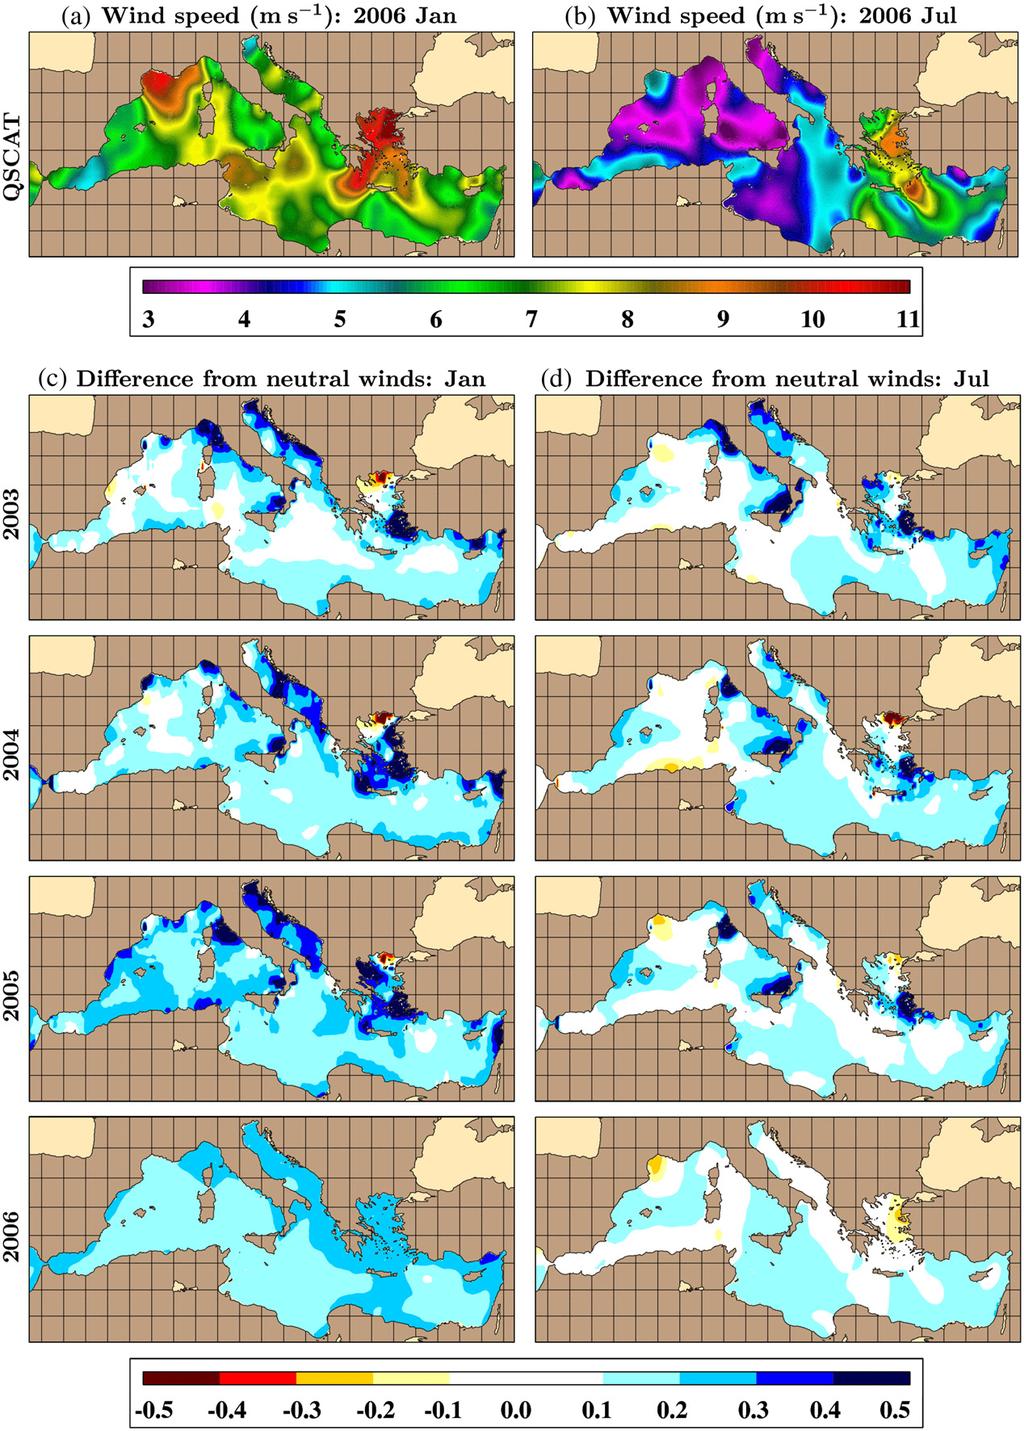 S120 A.B. Kara et al. / Journal of Marine Systems 78 (2009) S119 S131 Fig. 1. Monthly mean winds from QSCAT in 2006: (a) January and (b) July.